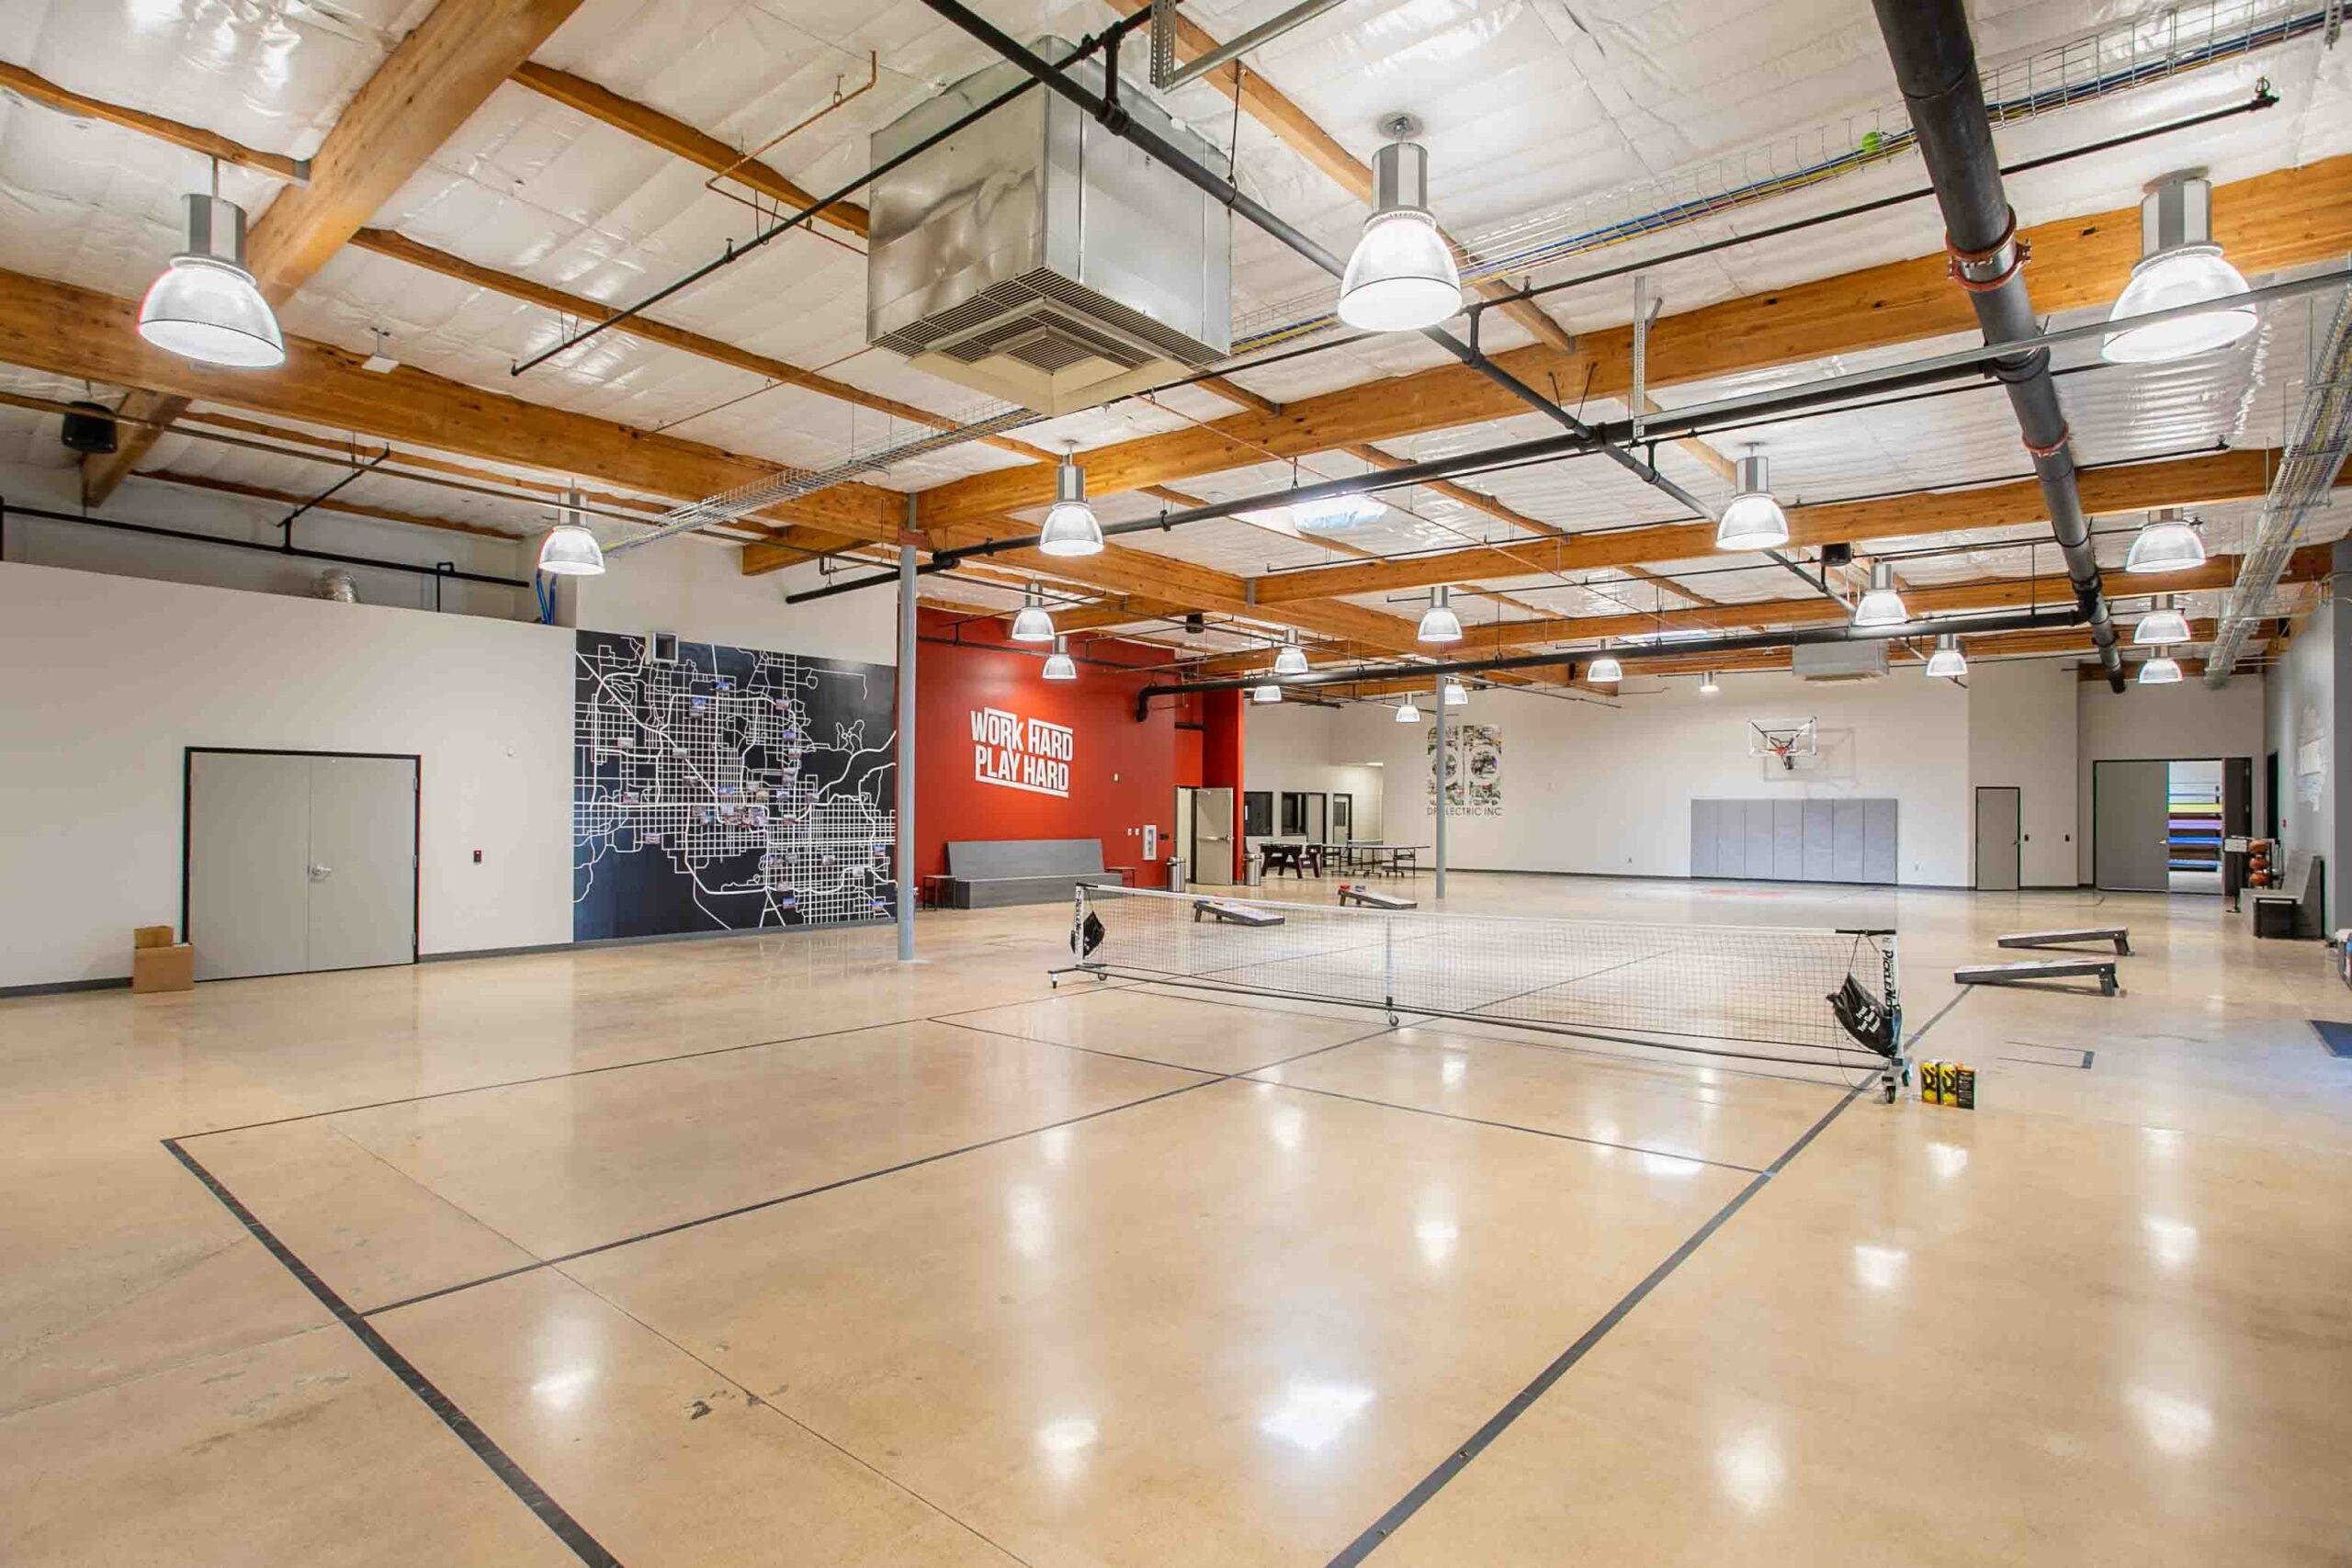 A large gym with a basketball court and a basketball hoop.